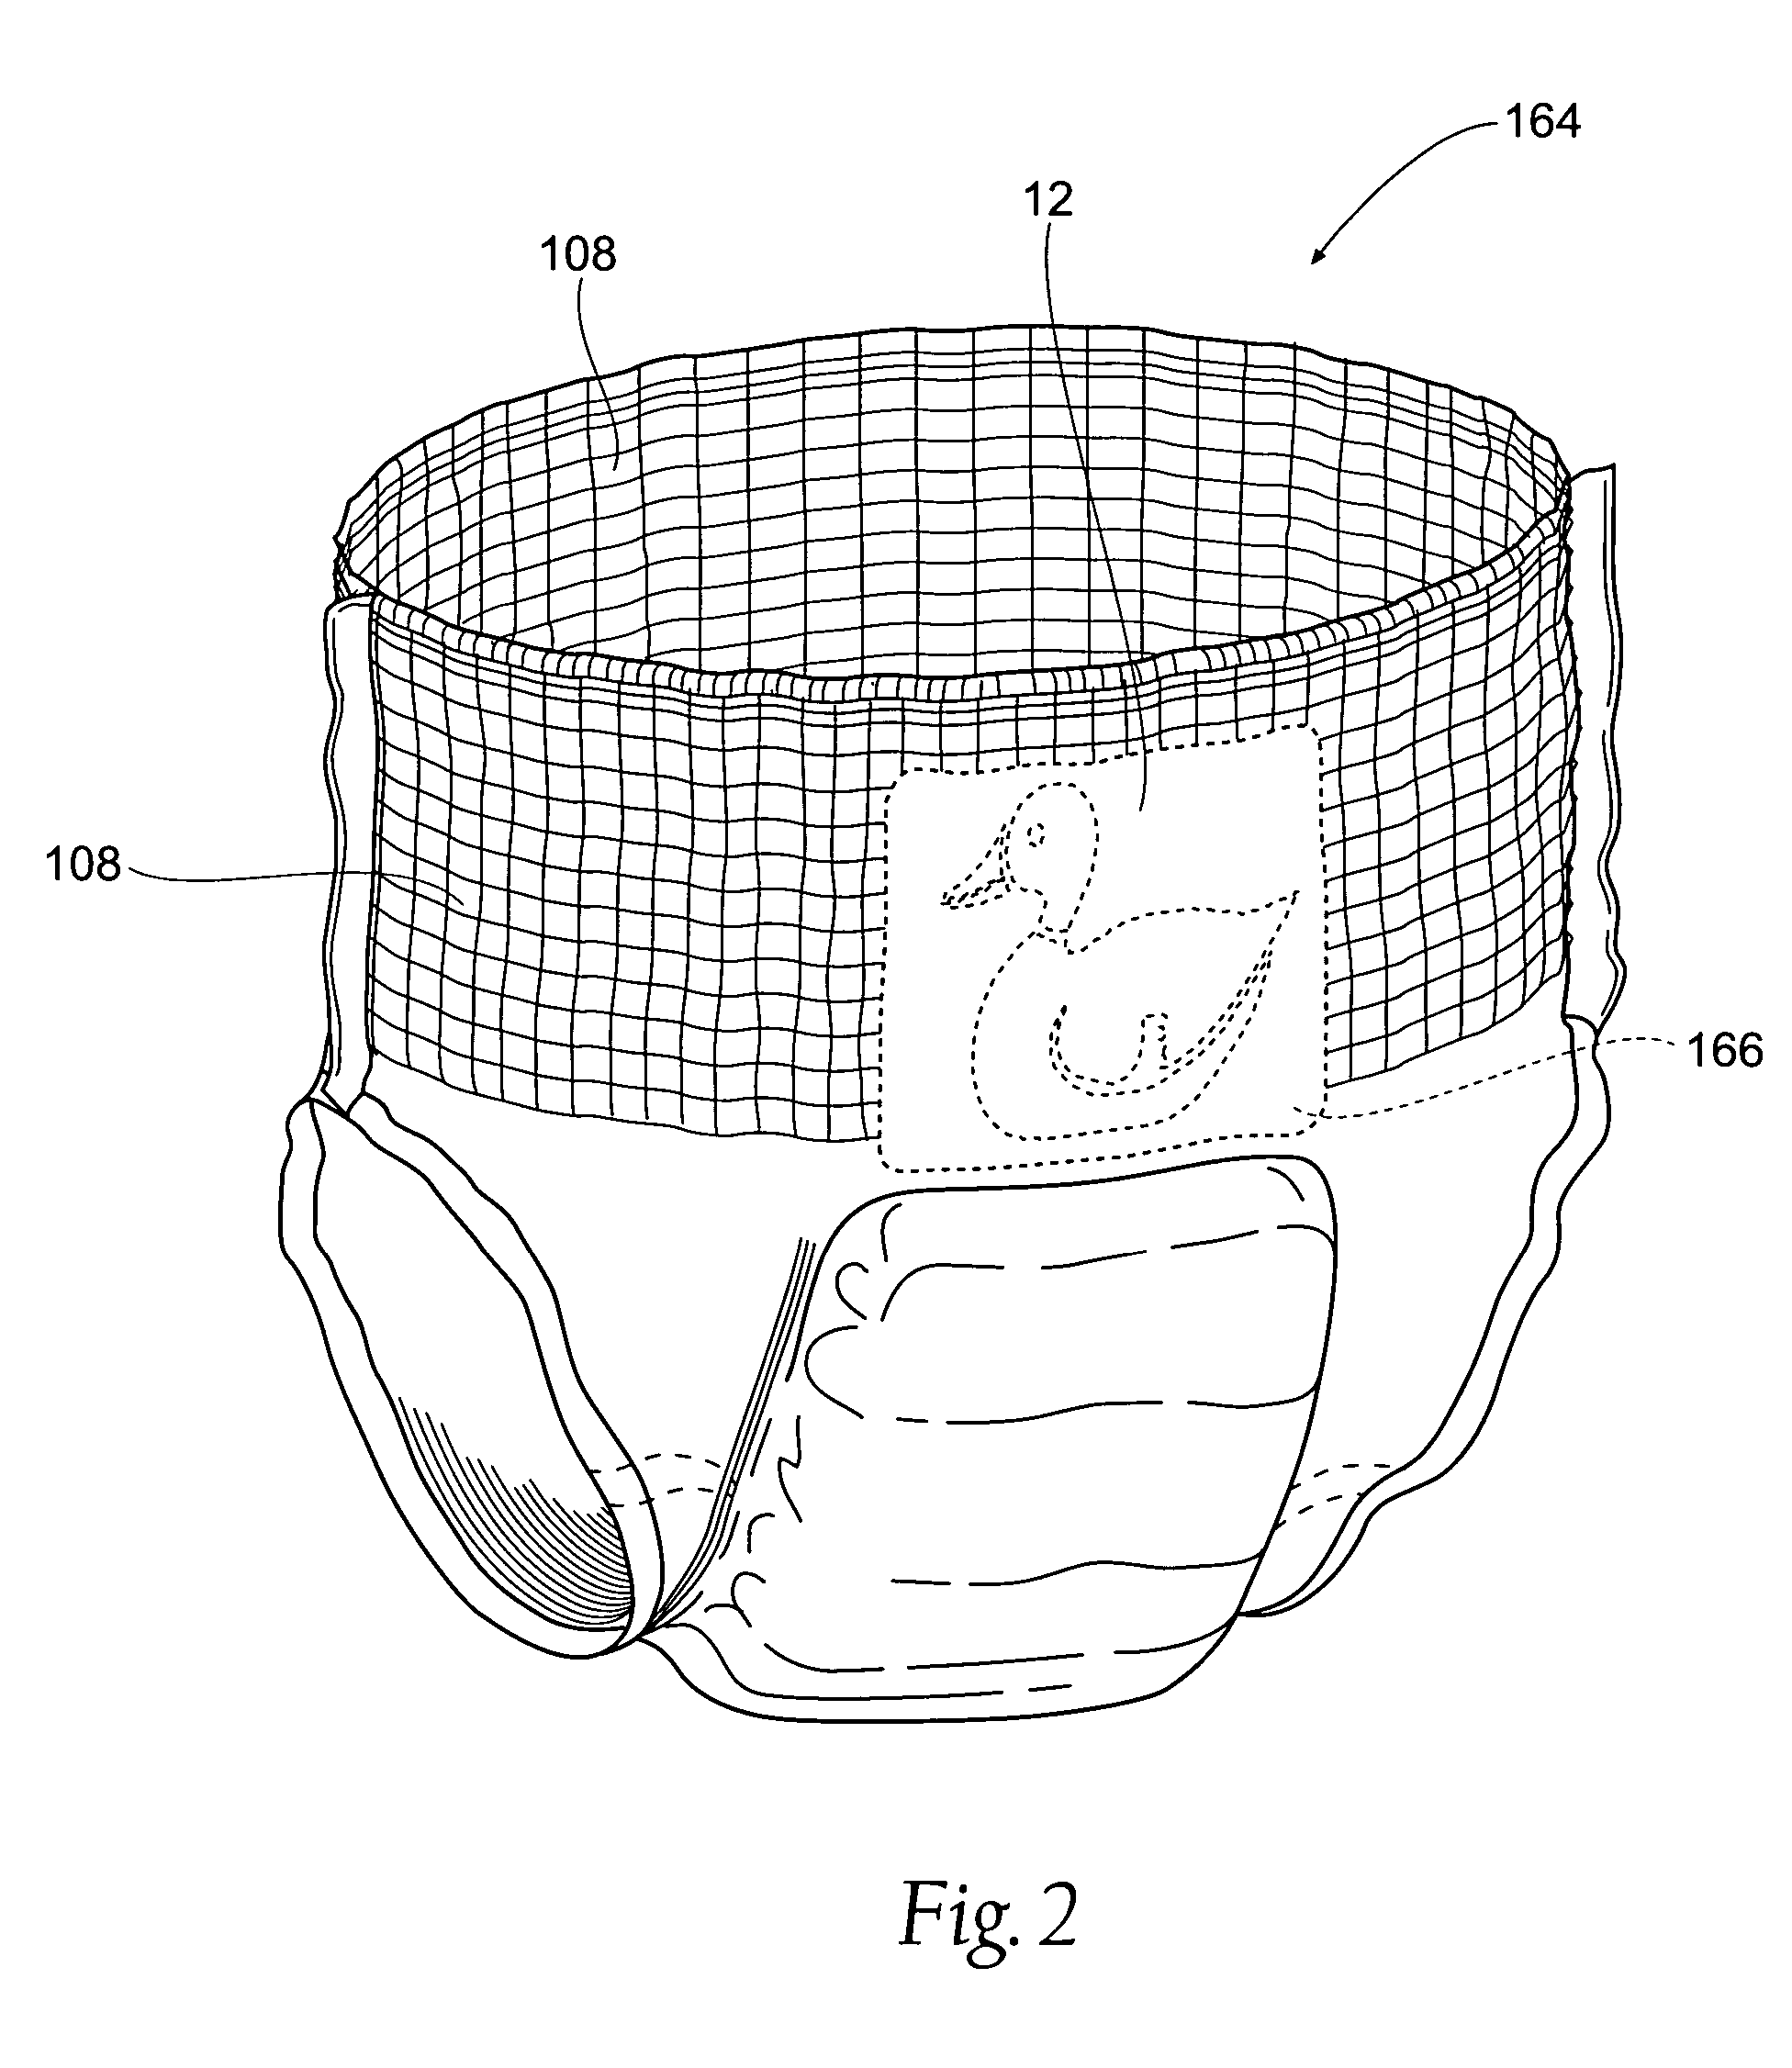 Apparatus and method for cutting elastic strands between layers of carrier webs